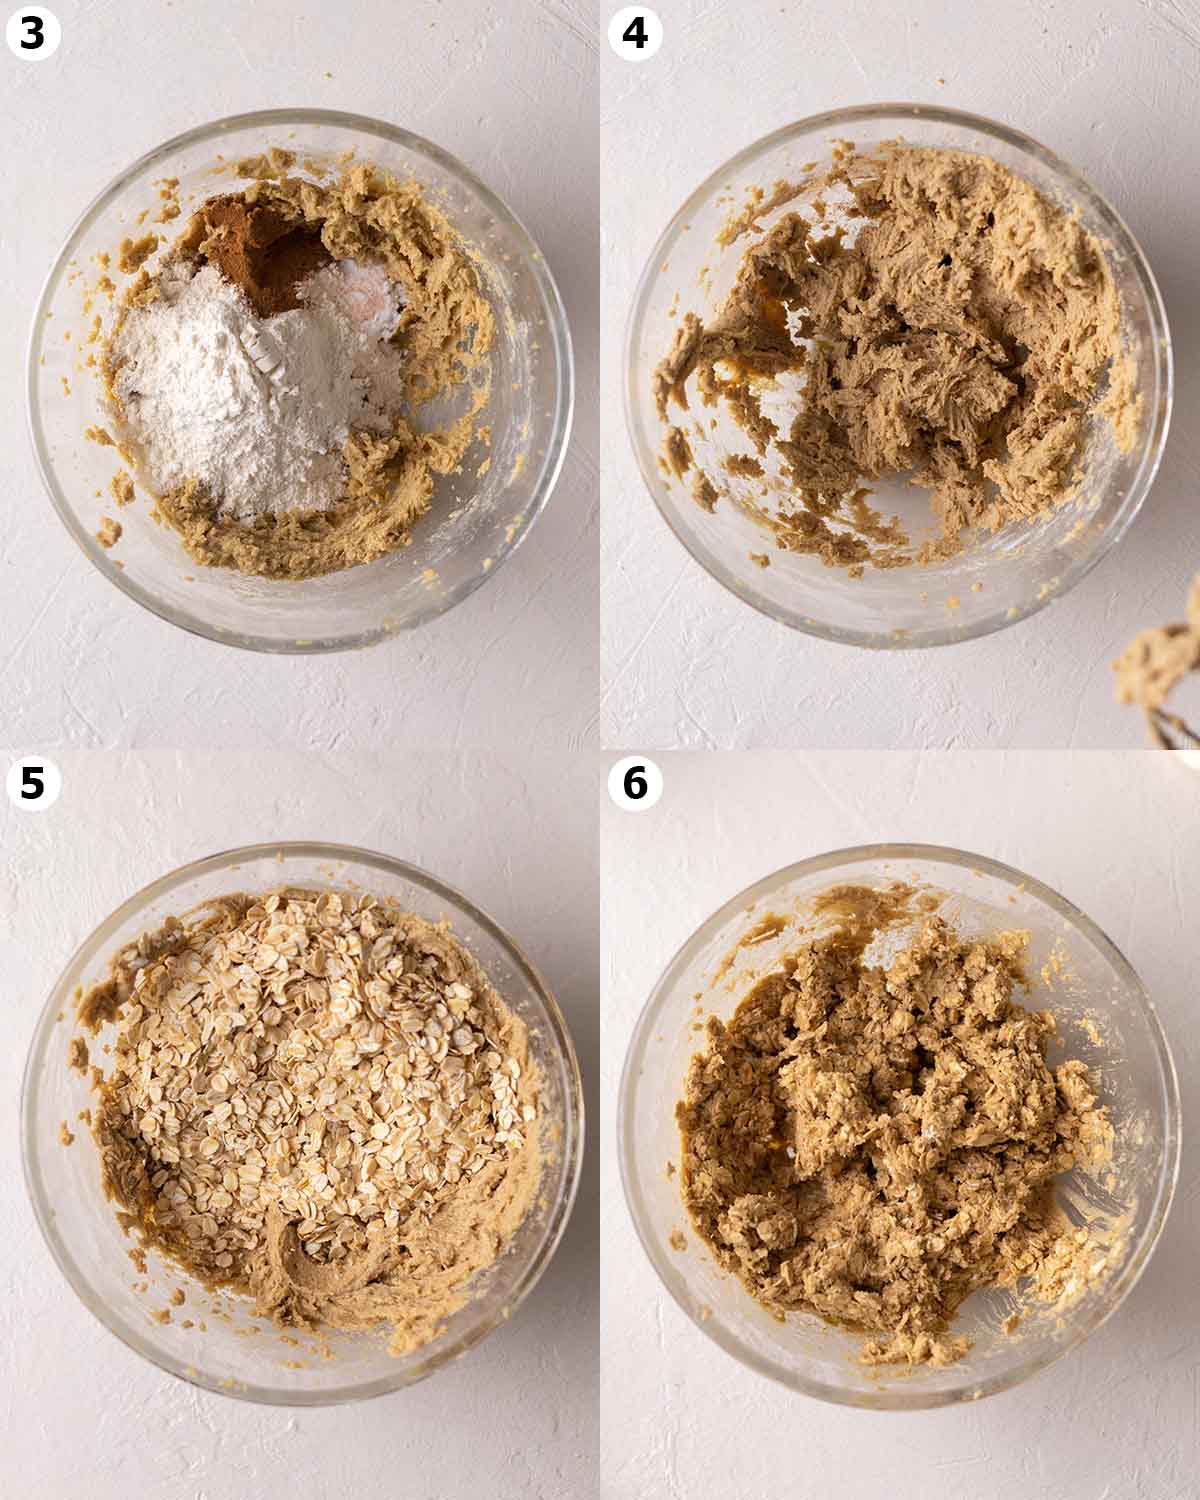 Four image collage showing how to make the rest of the oatmeal cookie batter.